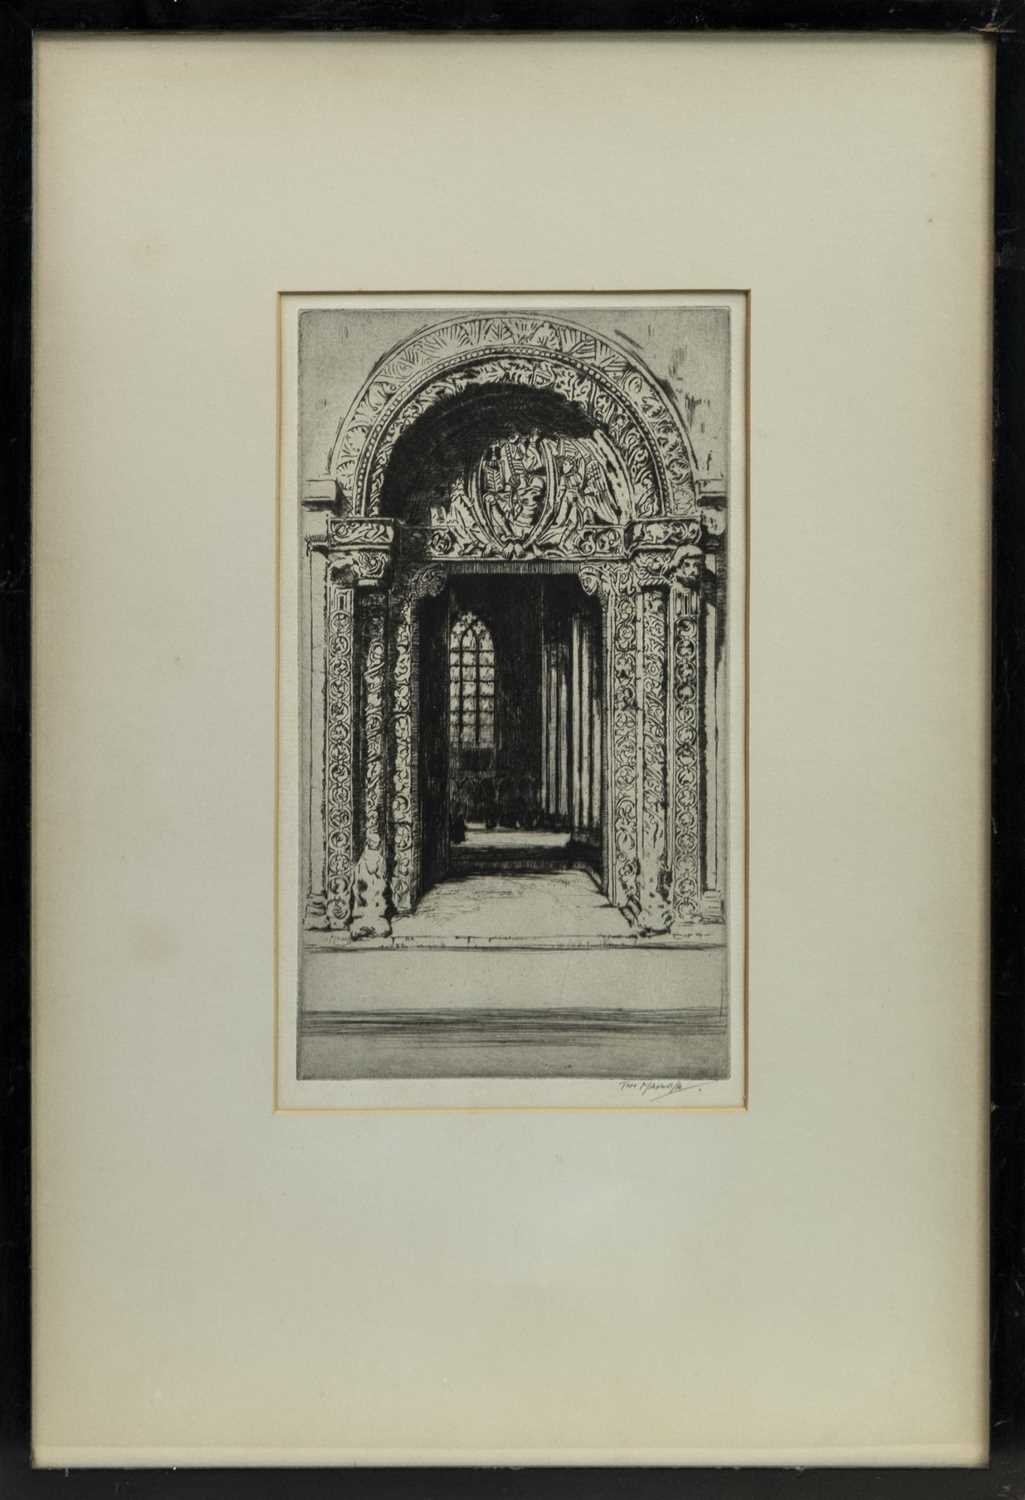 Lot 164 - ORNATE DOORS, AN ETCHING BY TOM MAXWELL